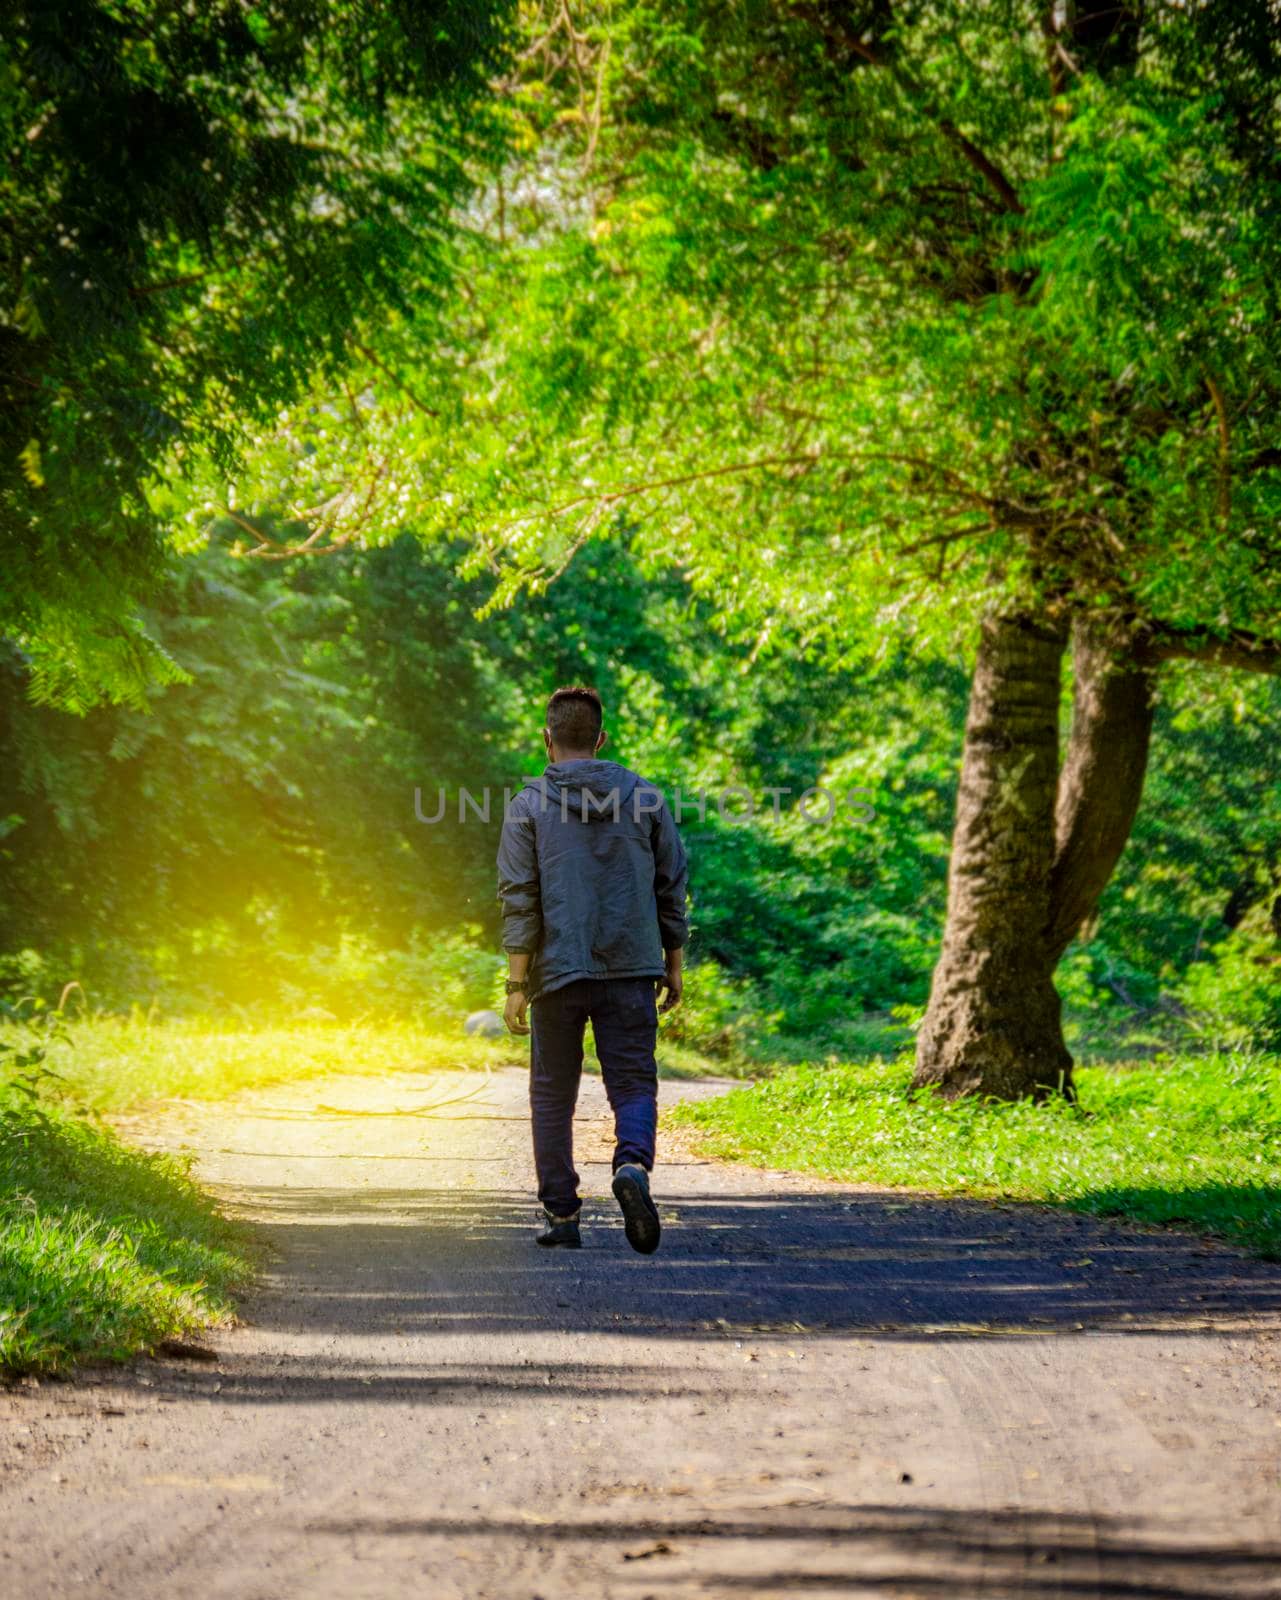 Latin man walking on a nice road, rear view of a young man walking on a road surrounded by trees